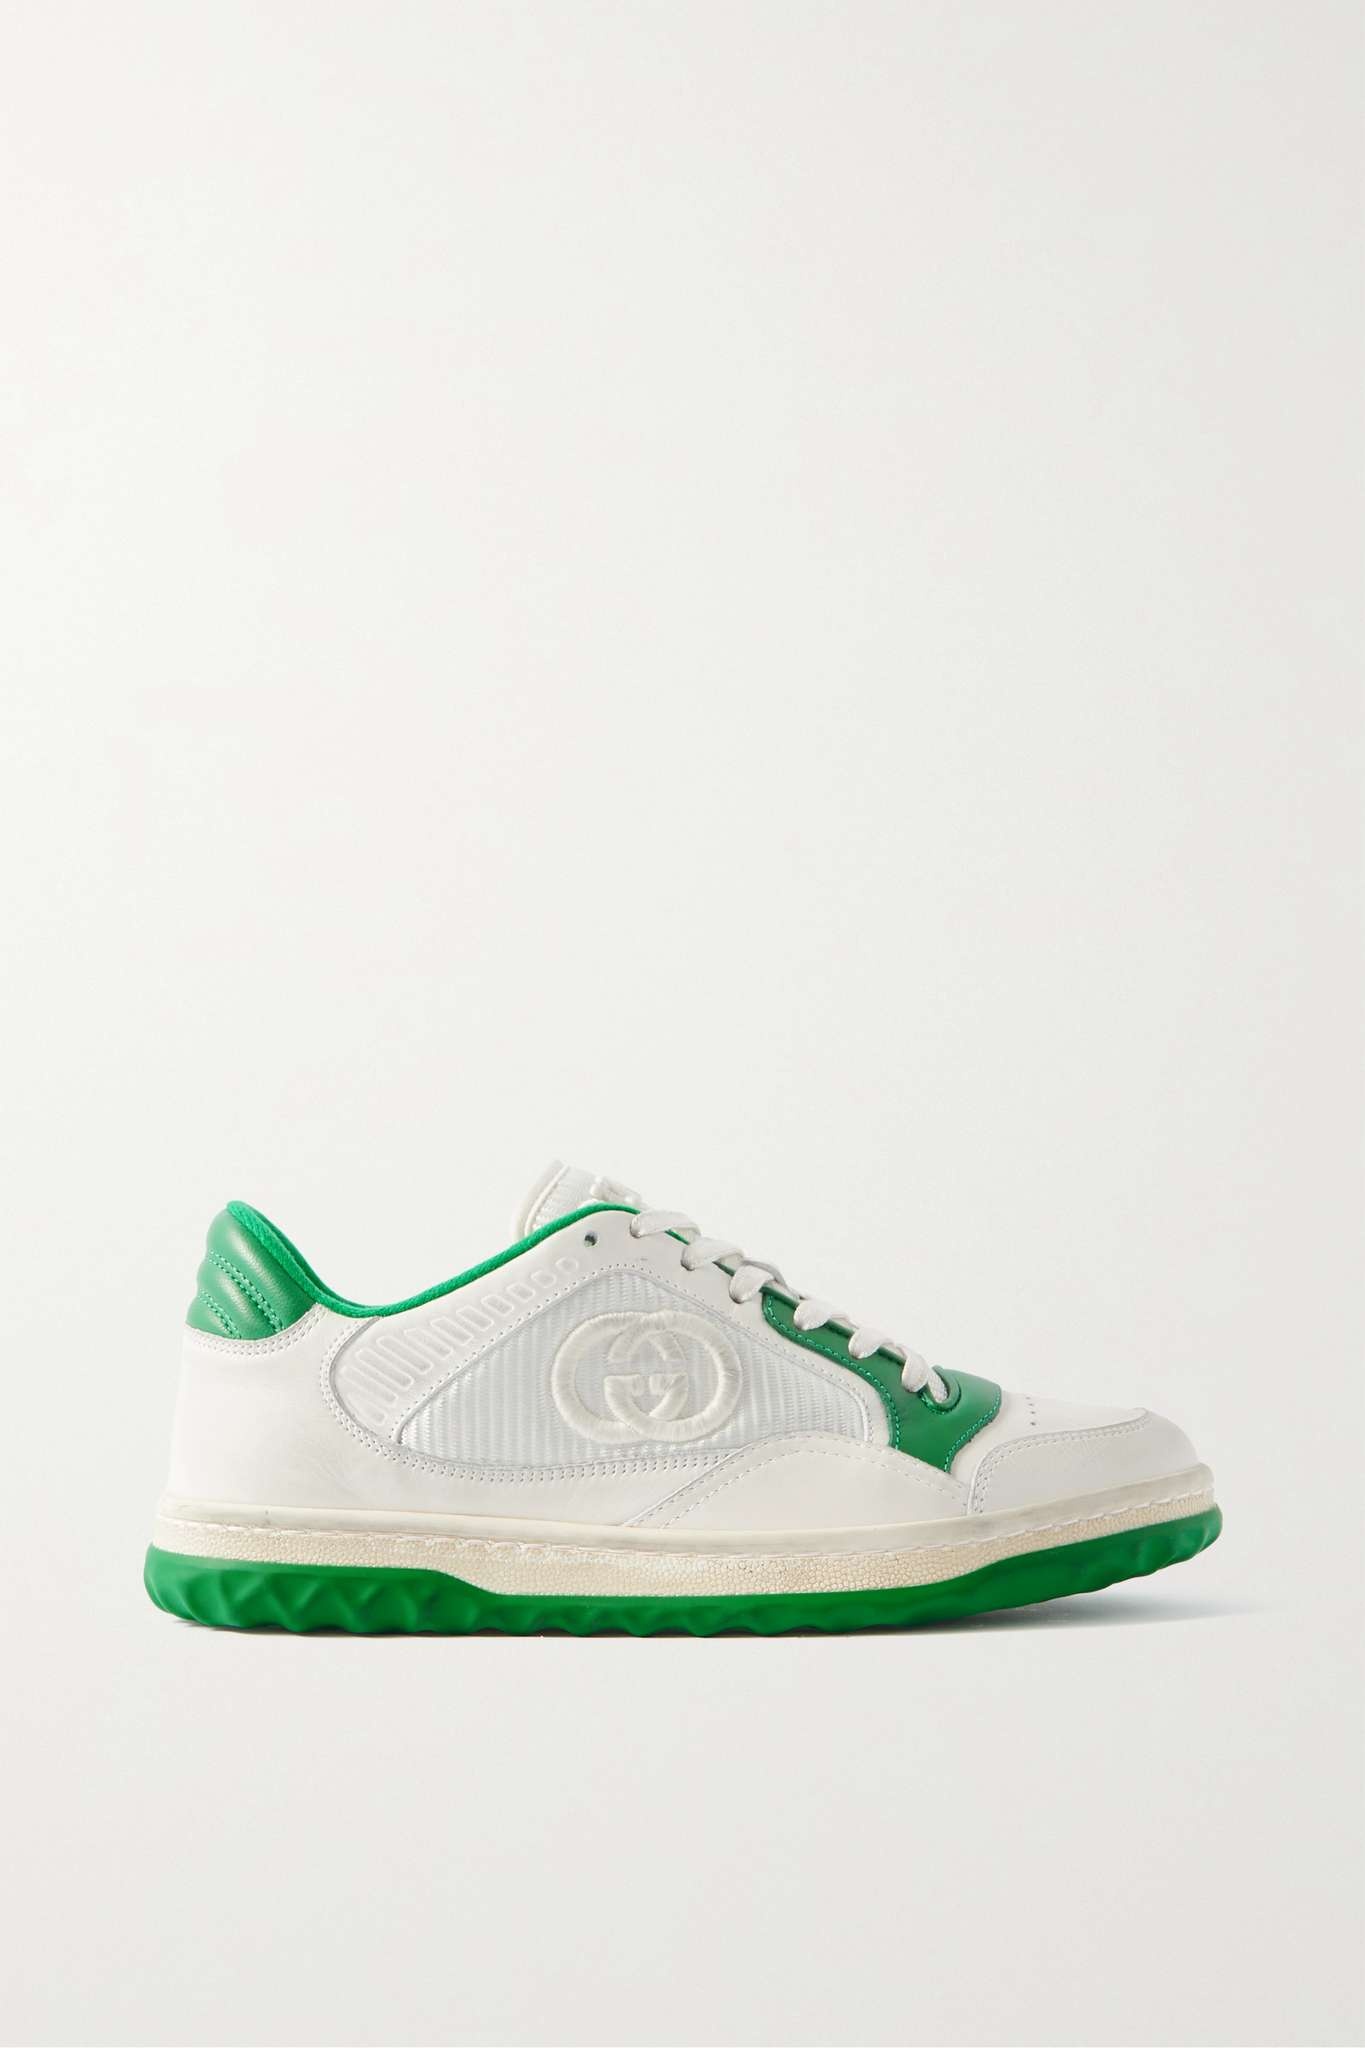 GUCCI MAC80 mesh-trimmed distressed leather sneakers | REVERSIBLE